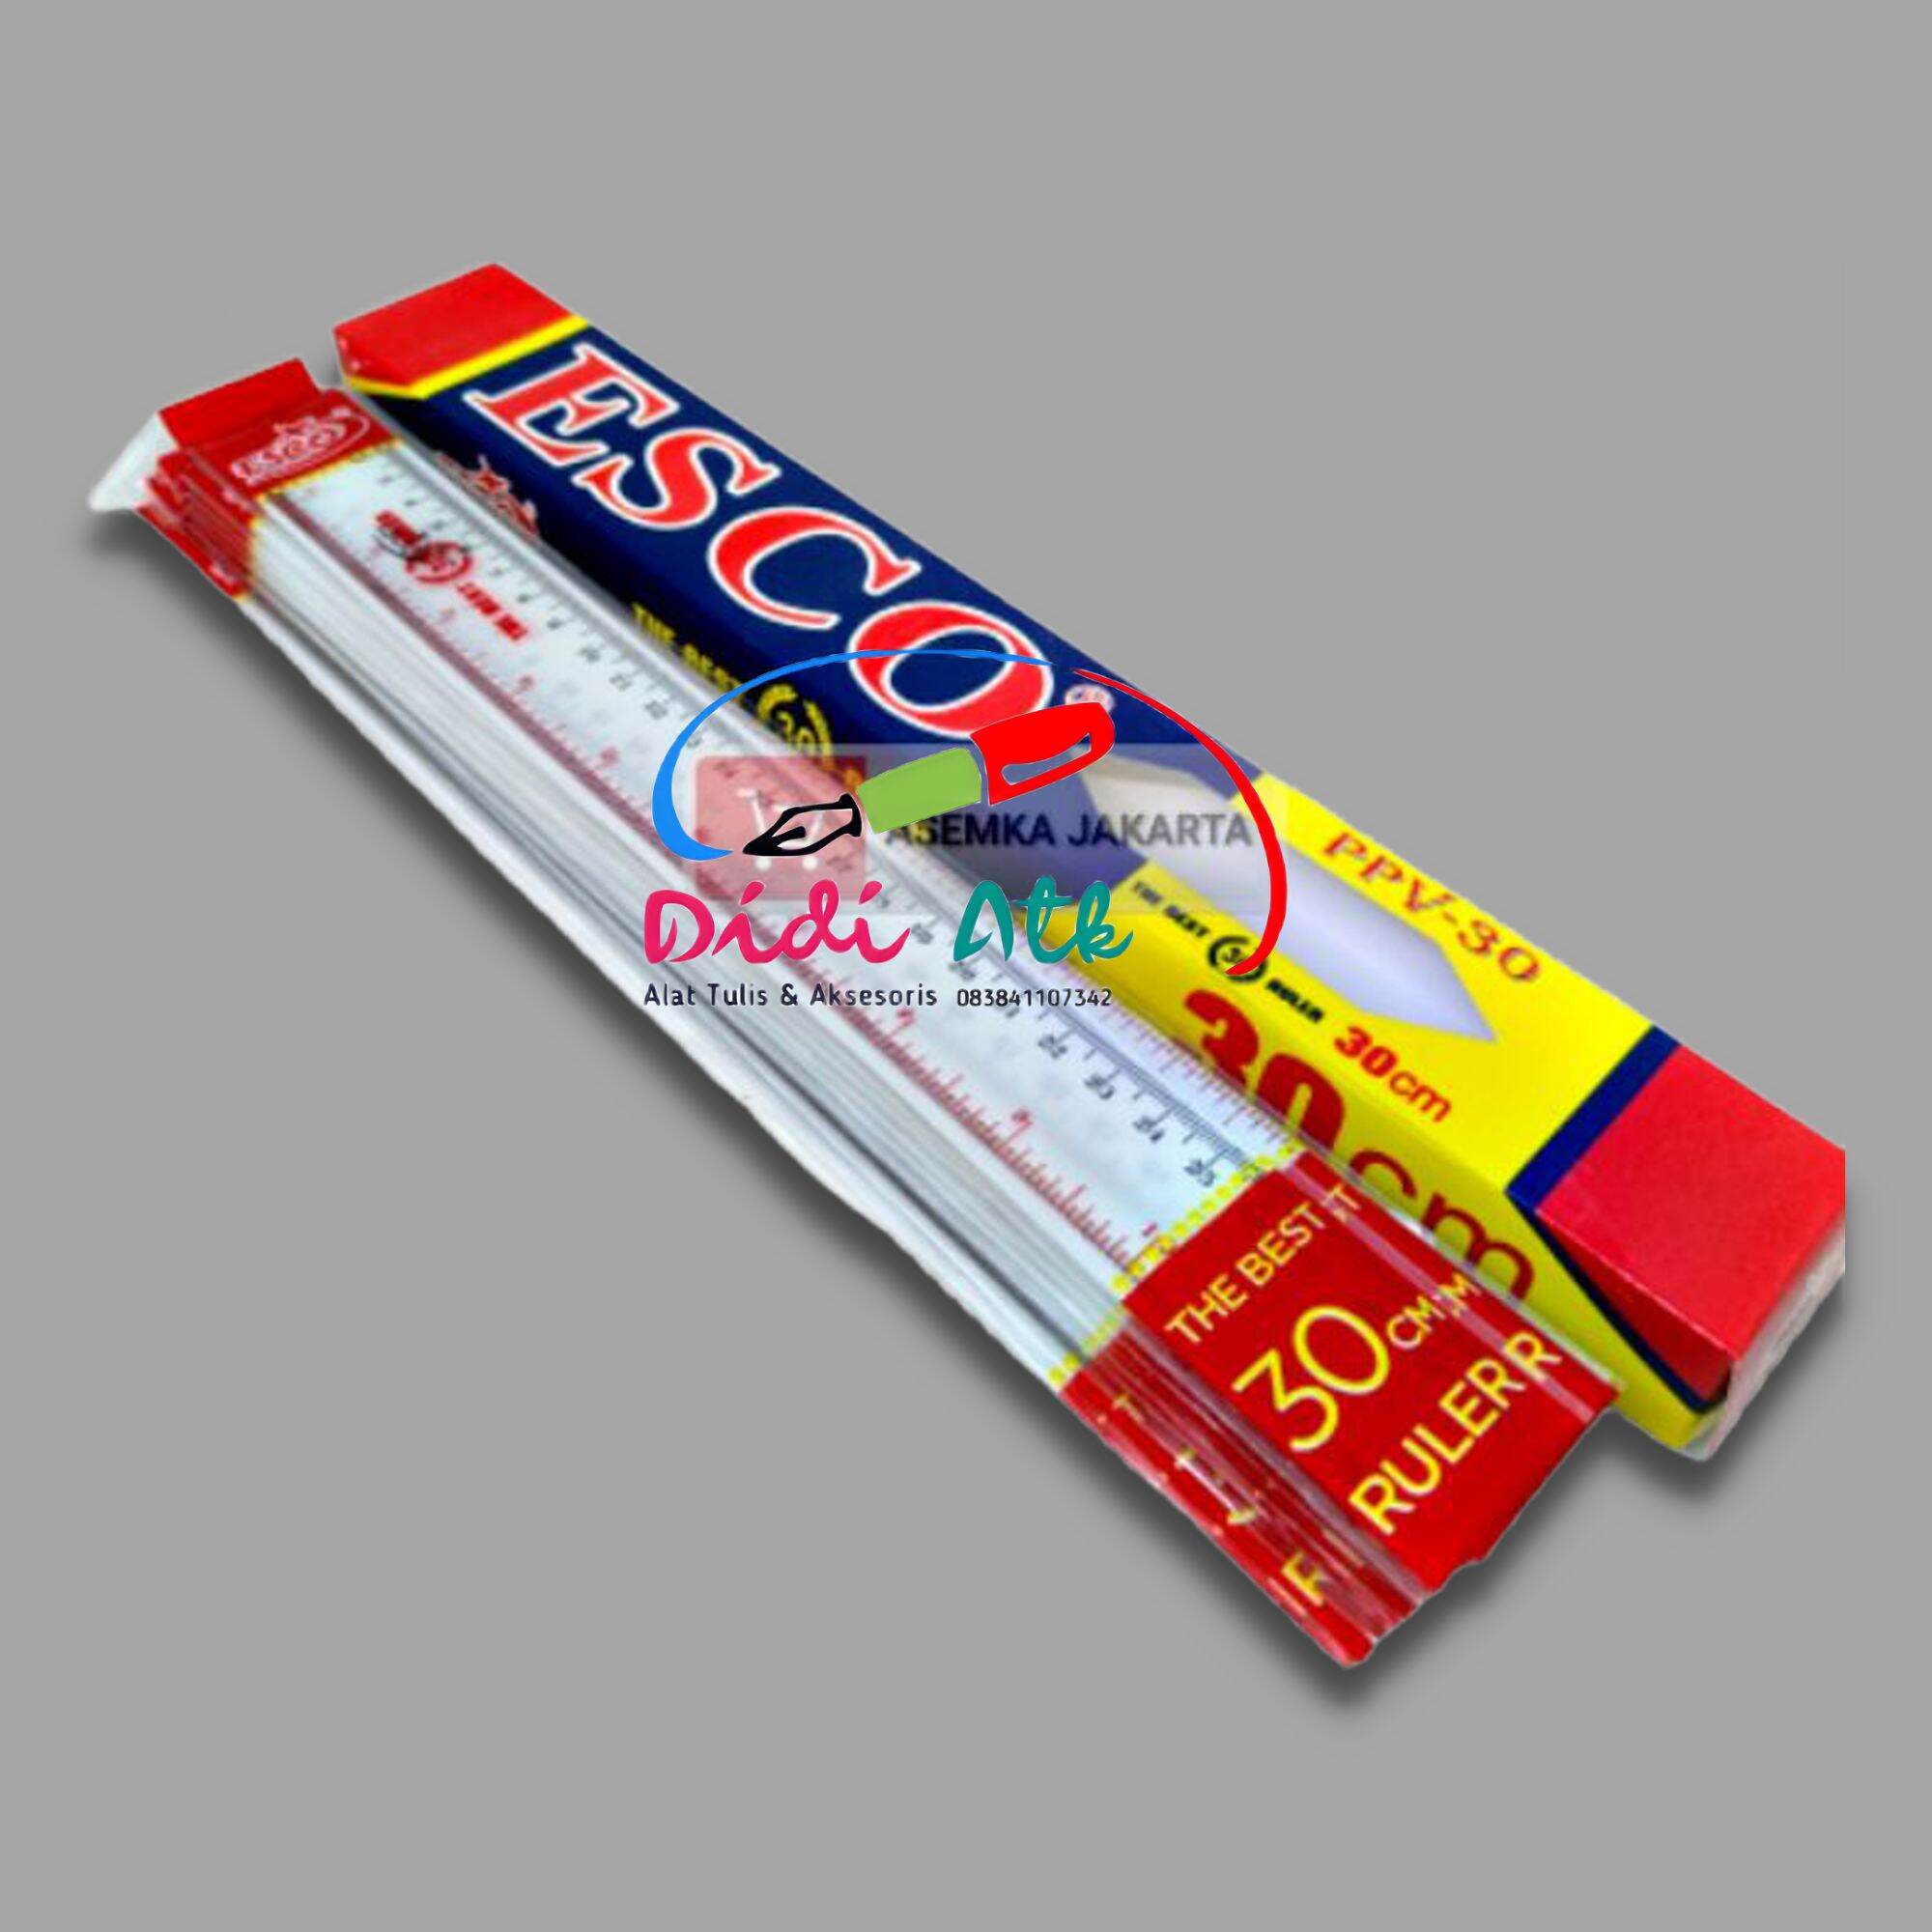 10%OFF ESCO(エスコ) 450x460x420mm/2列2段 収納ボックス(引出し式) EA506MP-2 [ZES013054]  K-material-shop 通販 PayPayモール